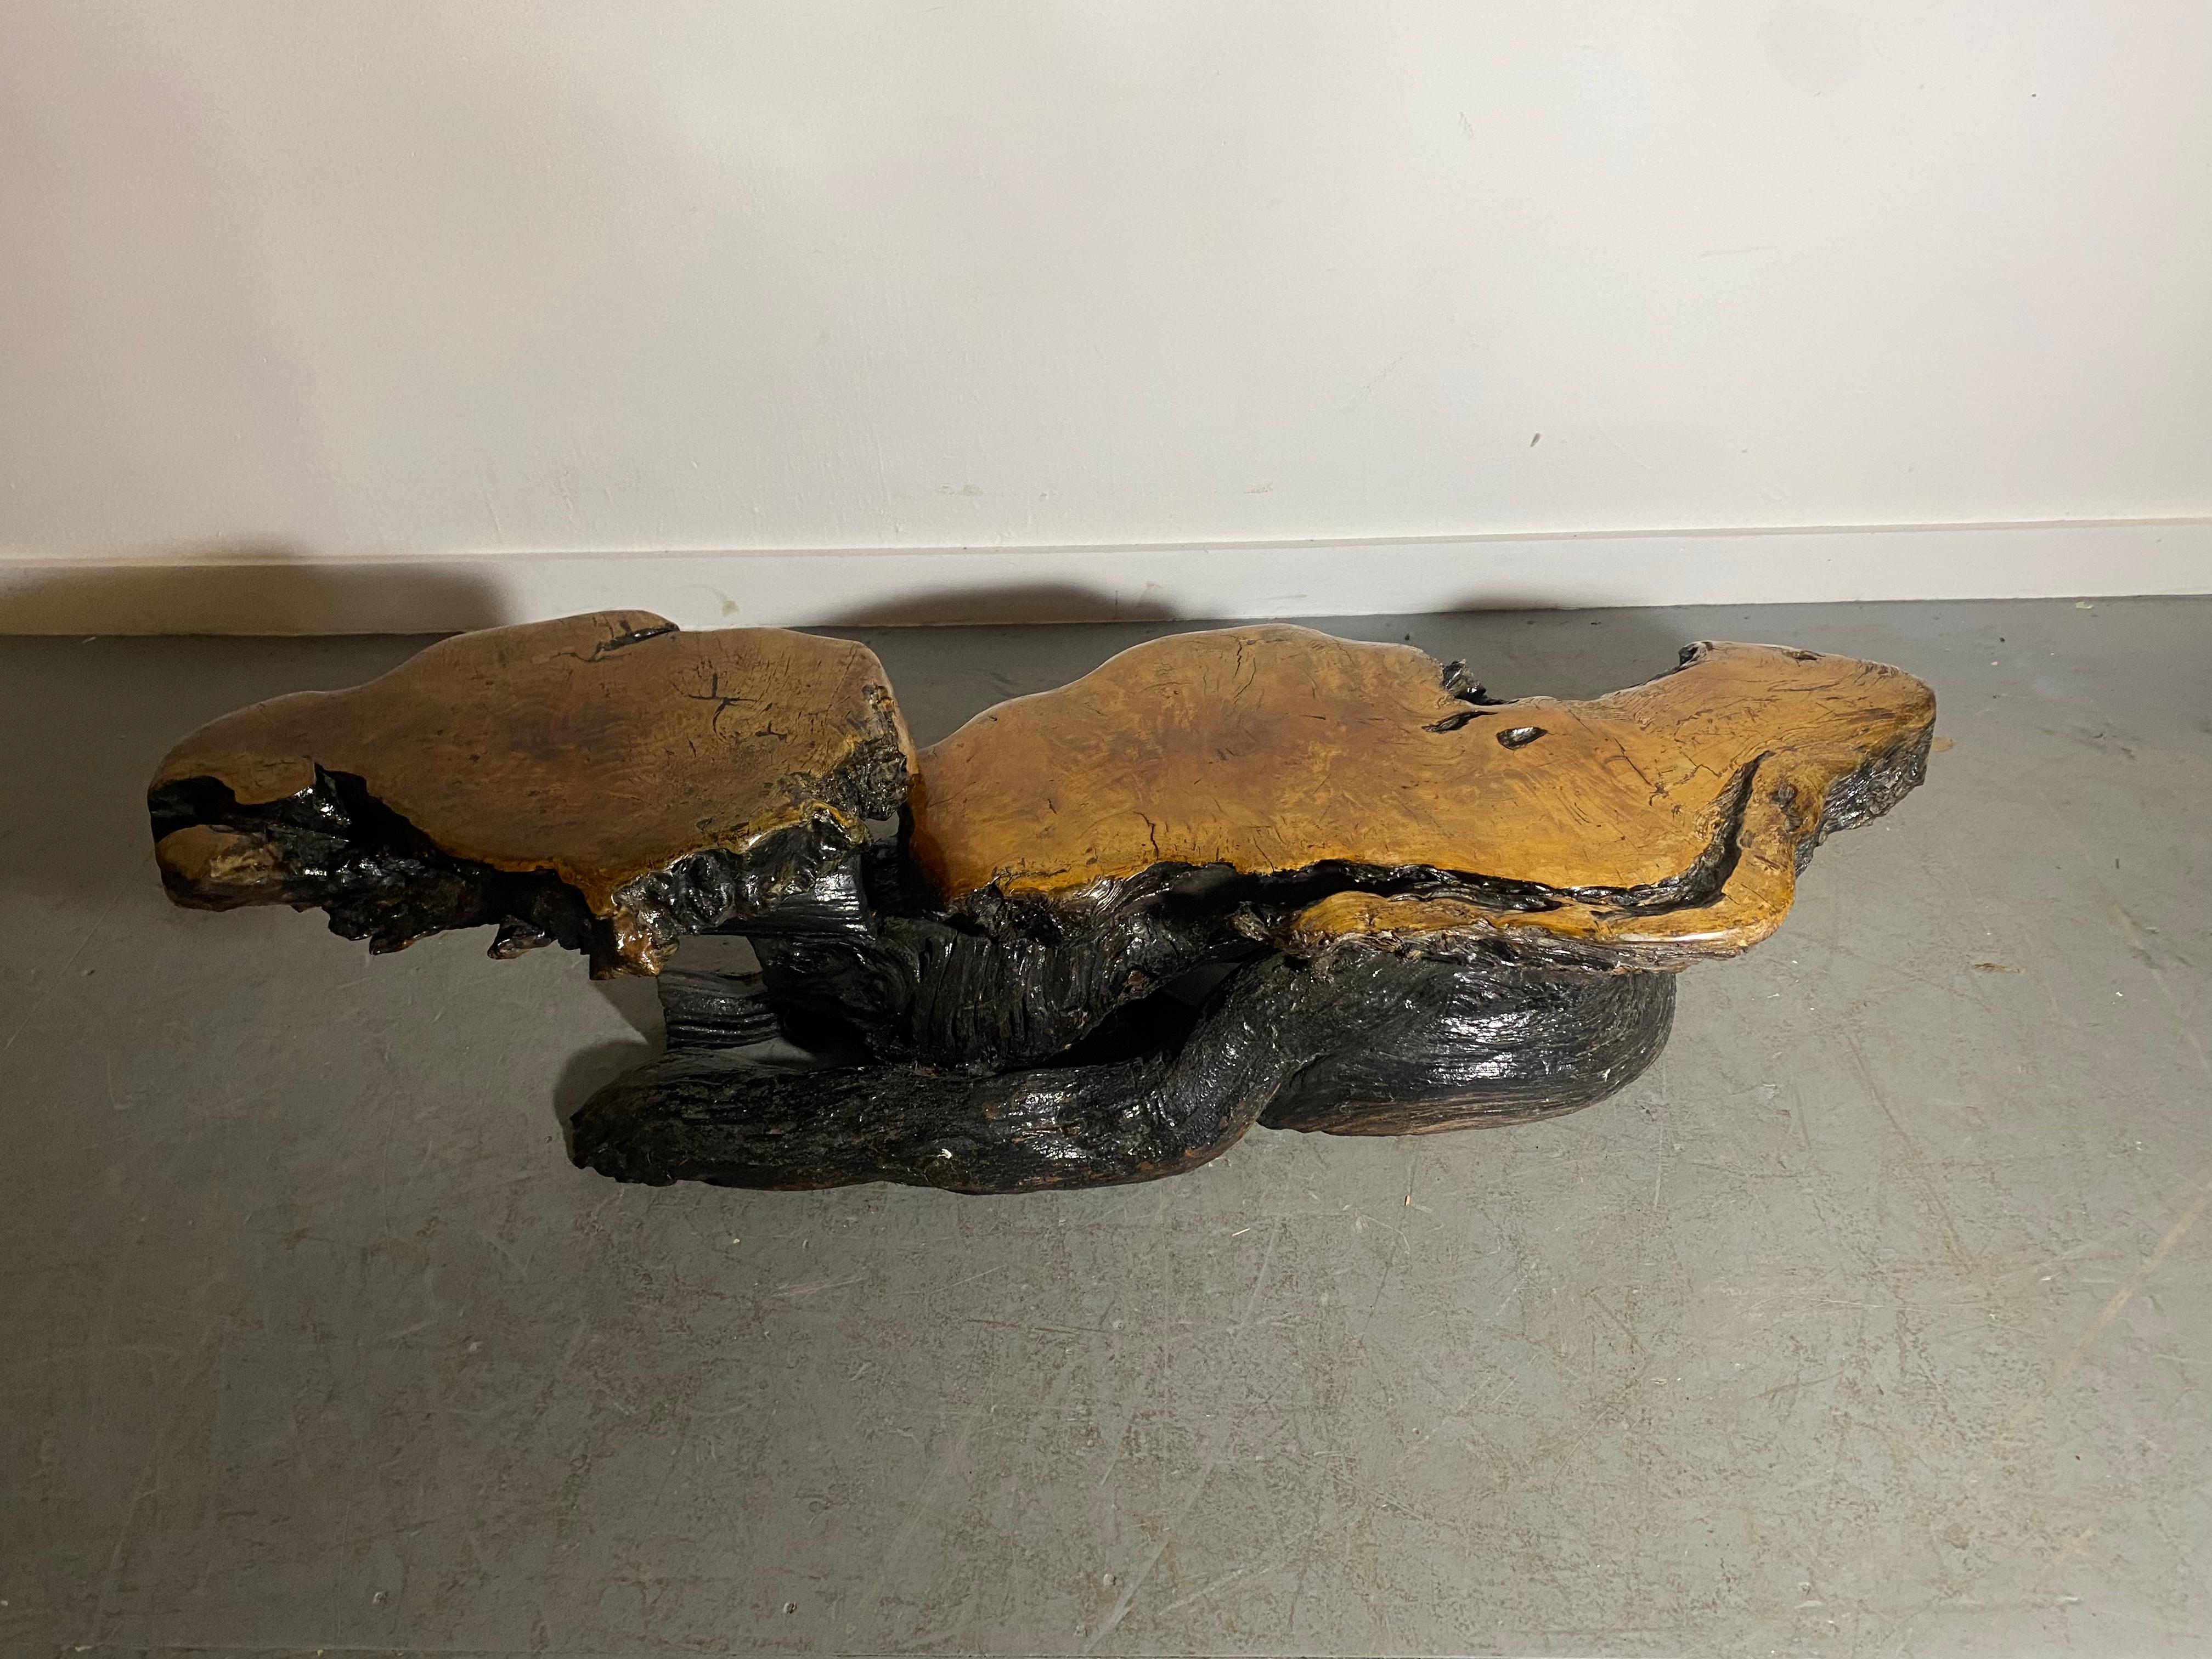 Unusual 2-tier organic root table / stand..rustic, adirondack, Stunning burl wood..Sculptural Blackened root base. Wonderful form and patina. Hand delivery avail to New York City of anywhere en route from Buffalo NY.